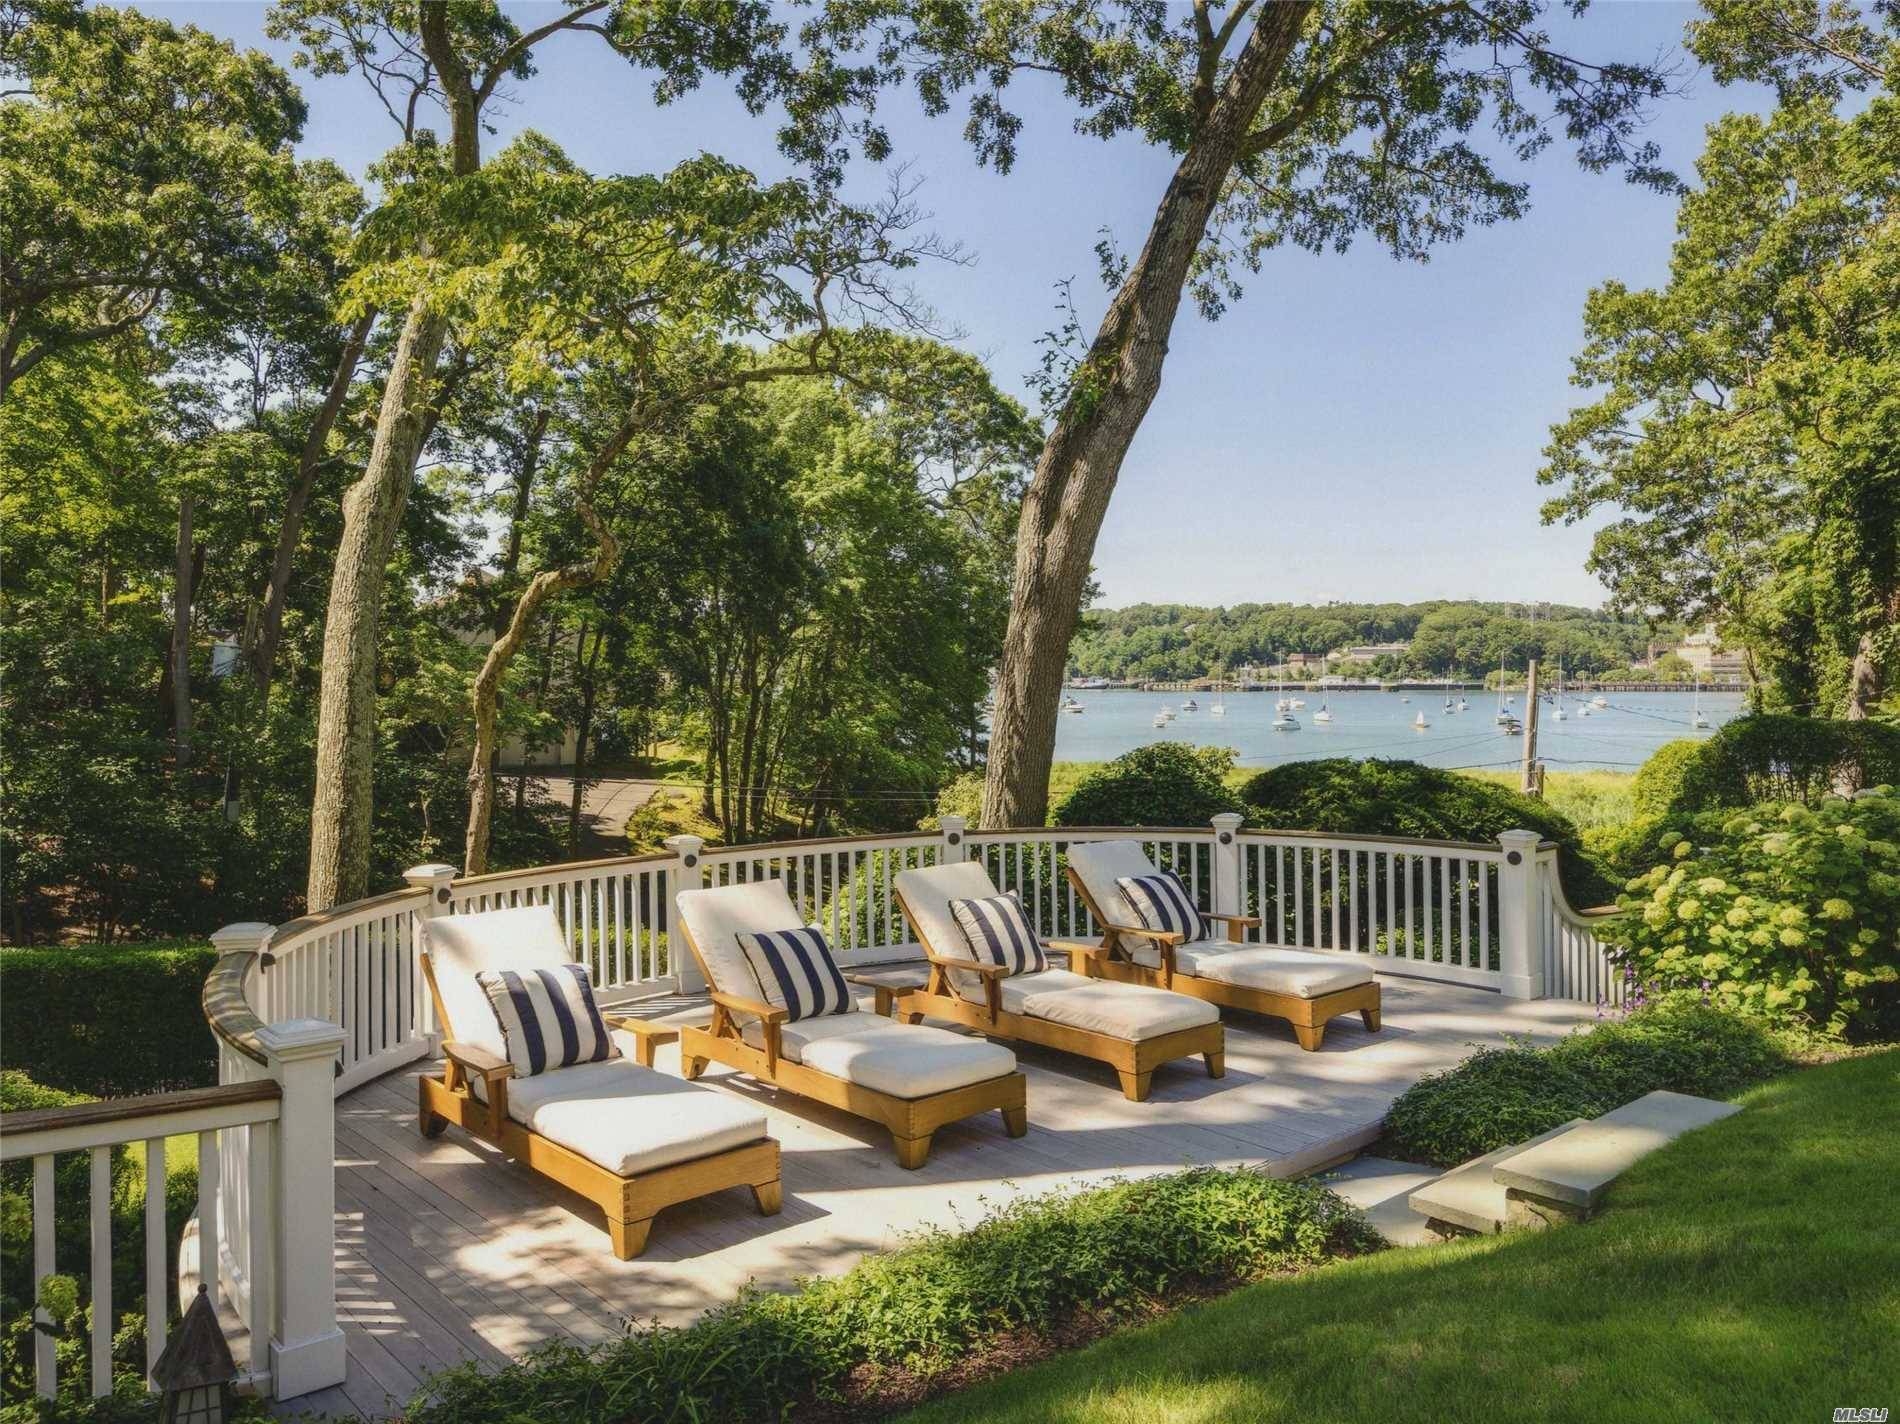 Sitting Steadfastly In One Of The North Shore's Most Exclusive Neighborhoods, Is A Sophisticated, Sun Drenched, Water View Nantucket Style Estate Surrounded By An Award Winning Pool Retreat And Landscape ...